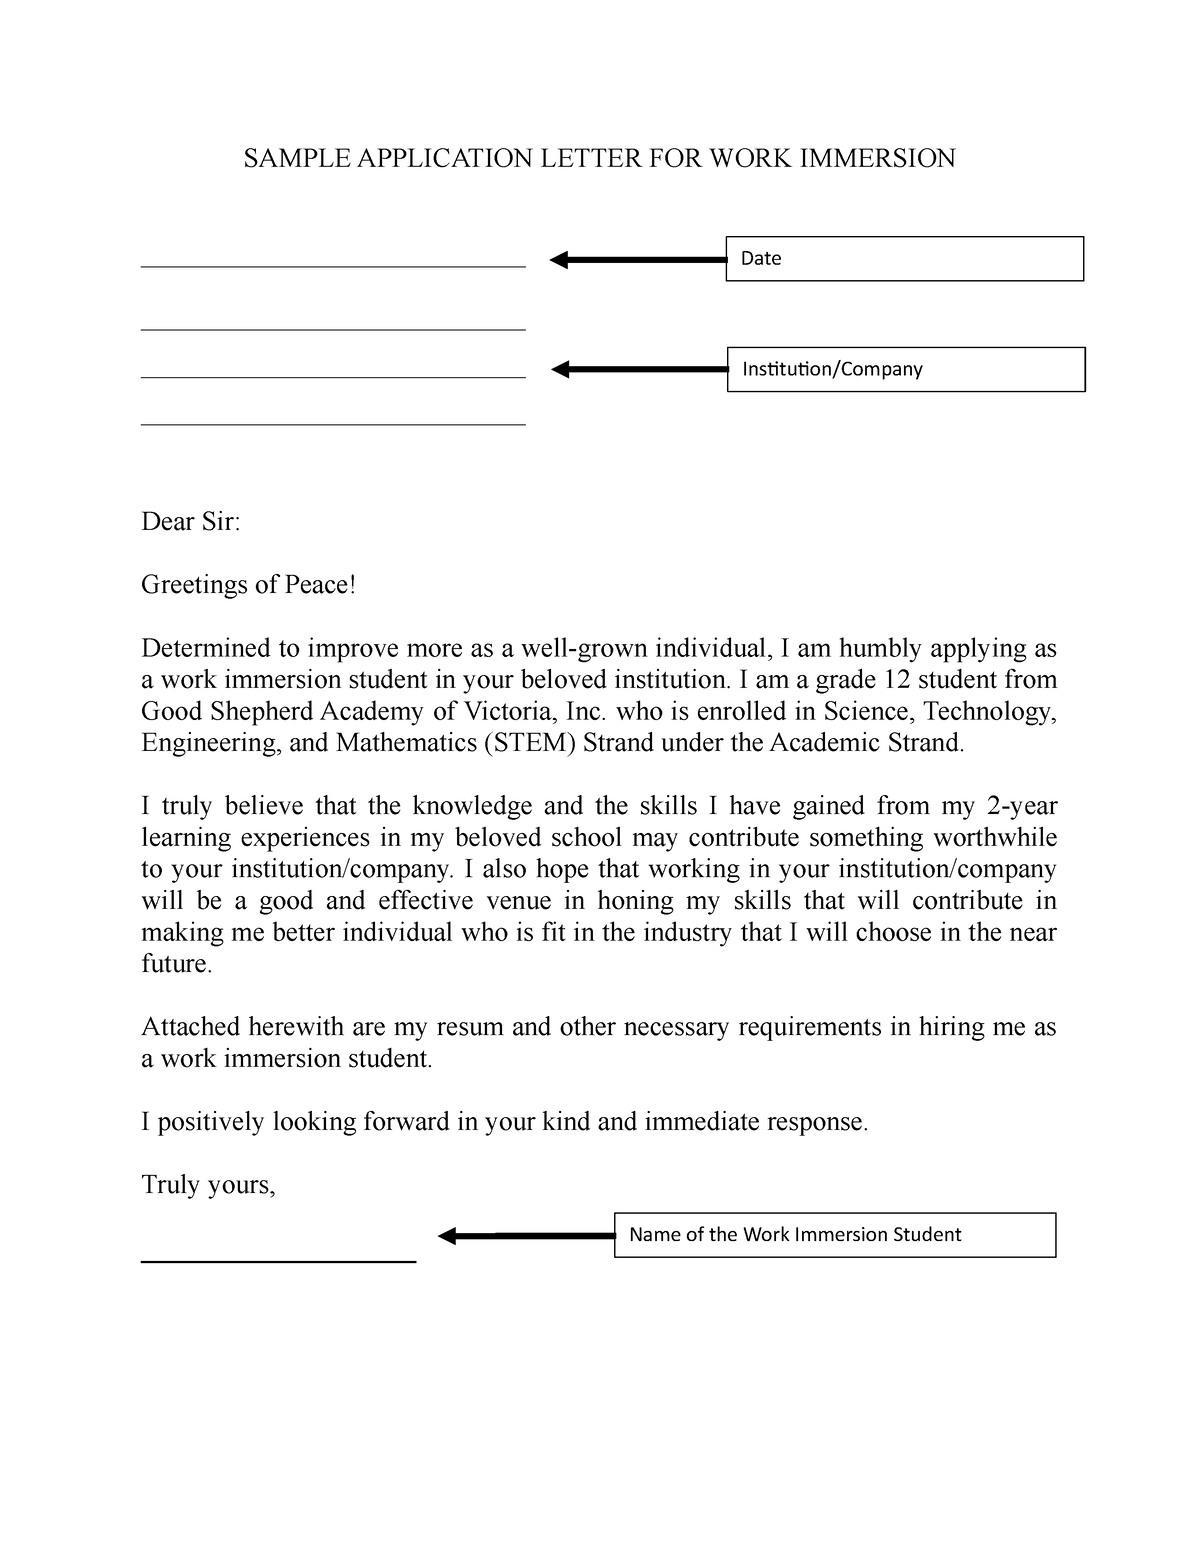 application letter for work immersion css